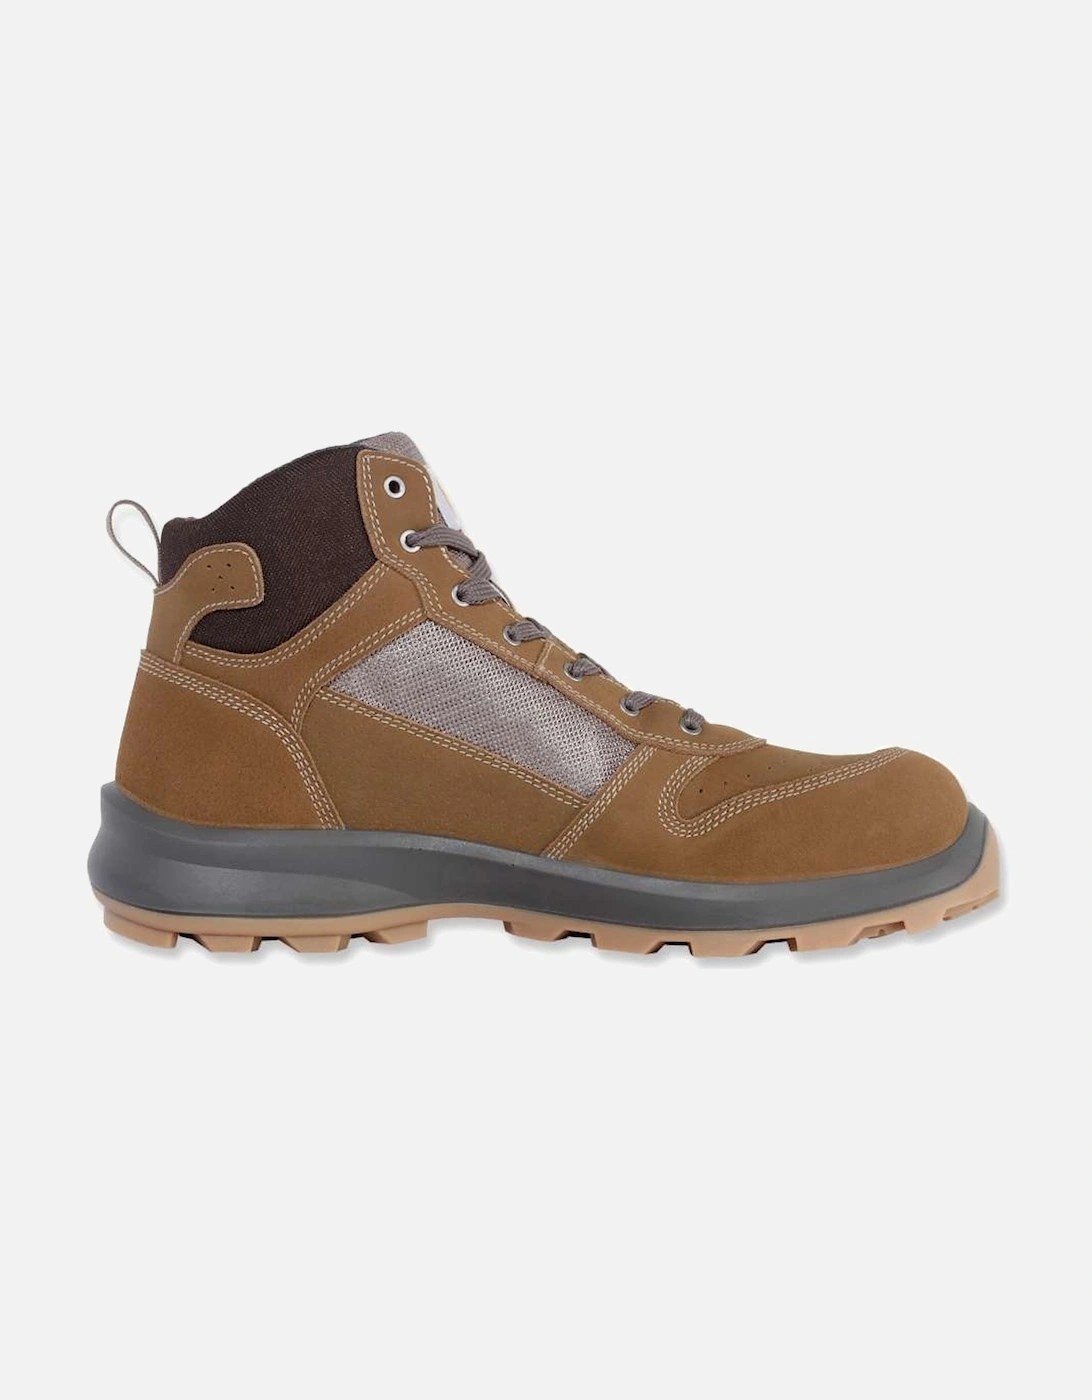 Carhartt Mens Sneaker Nubuck Leather Mid Work Safety Boots